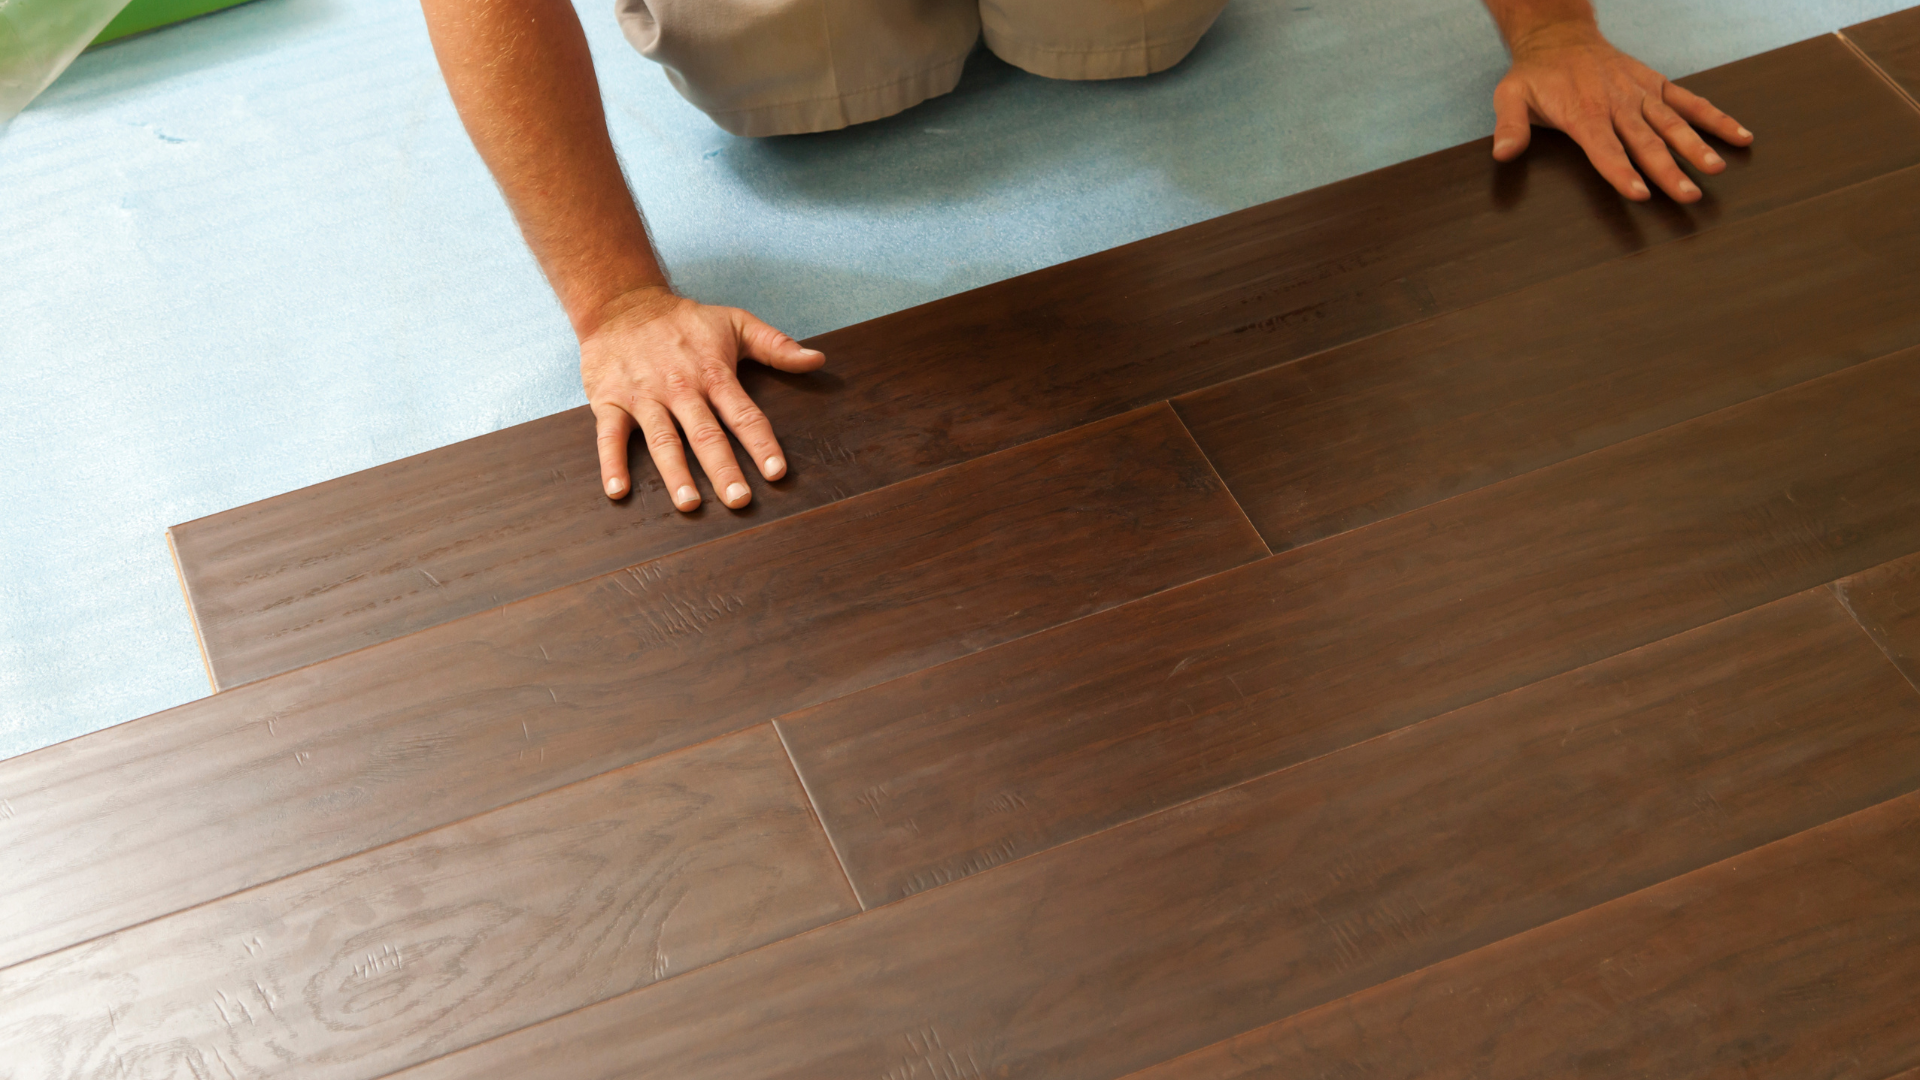 A person is installing a laminate floor with a wood design in a room.